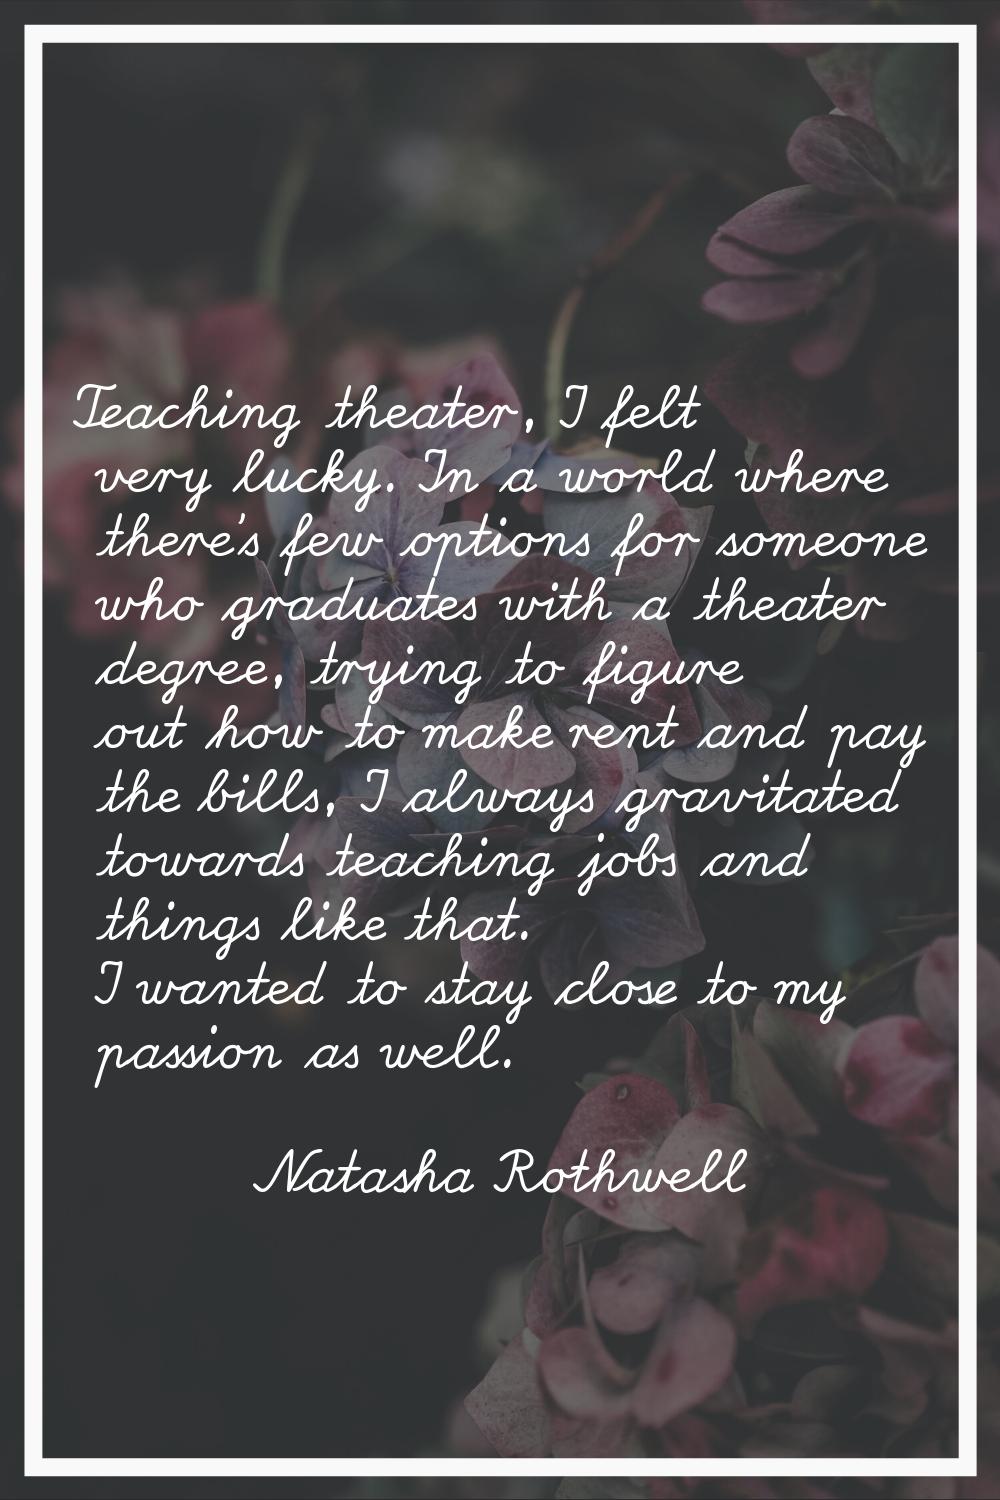 Teaching theater, I felt very lucky. In a world where there's few options for someone who graduates